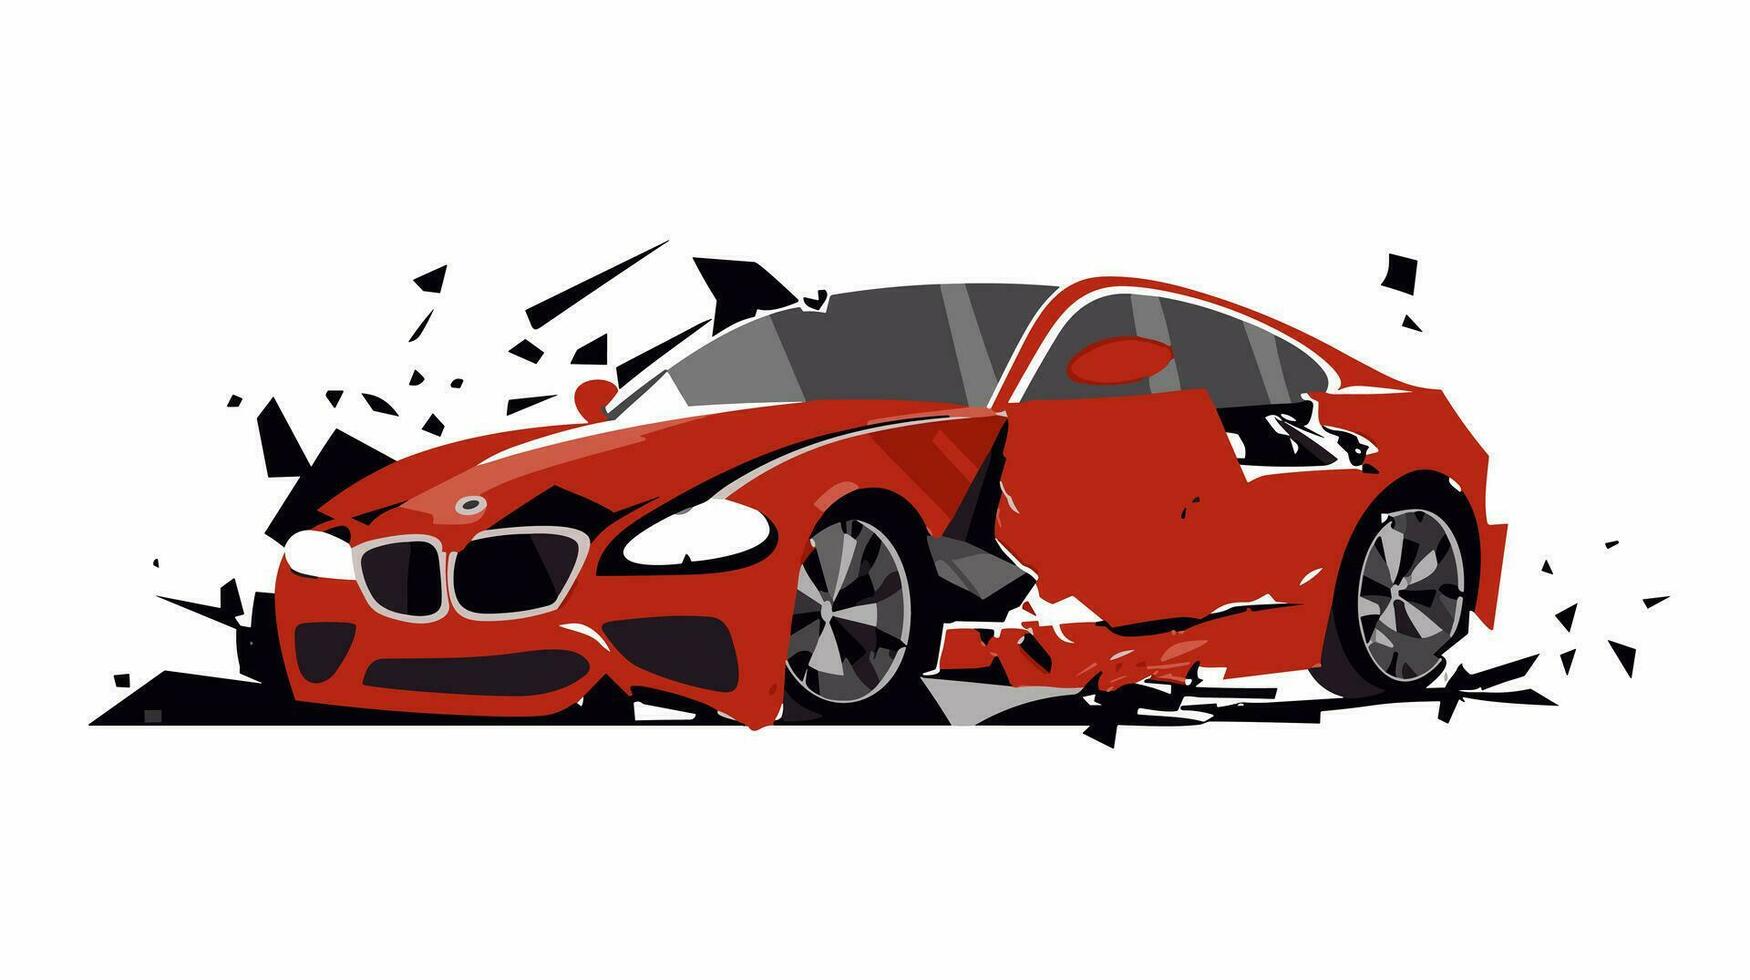 Symbol of Resilience Exploring the Broken Car Banner Image vector